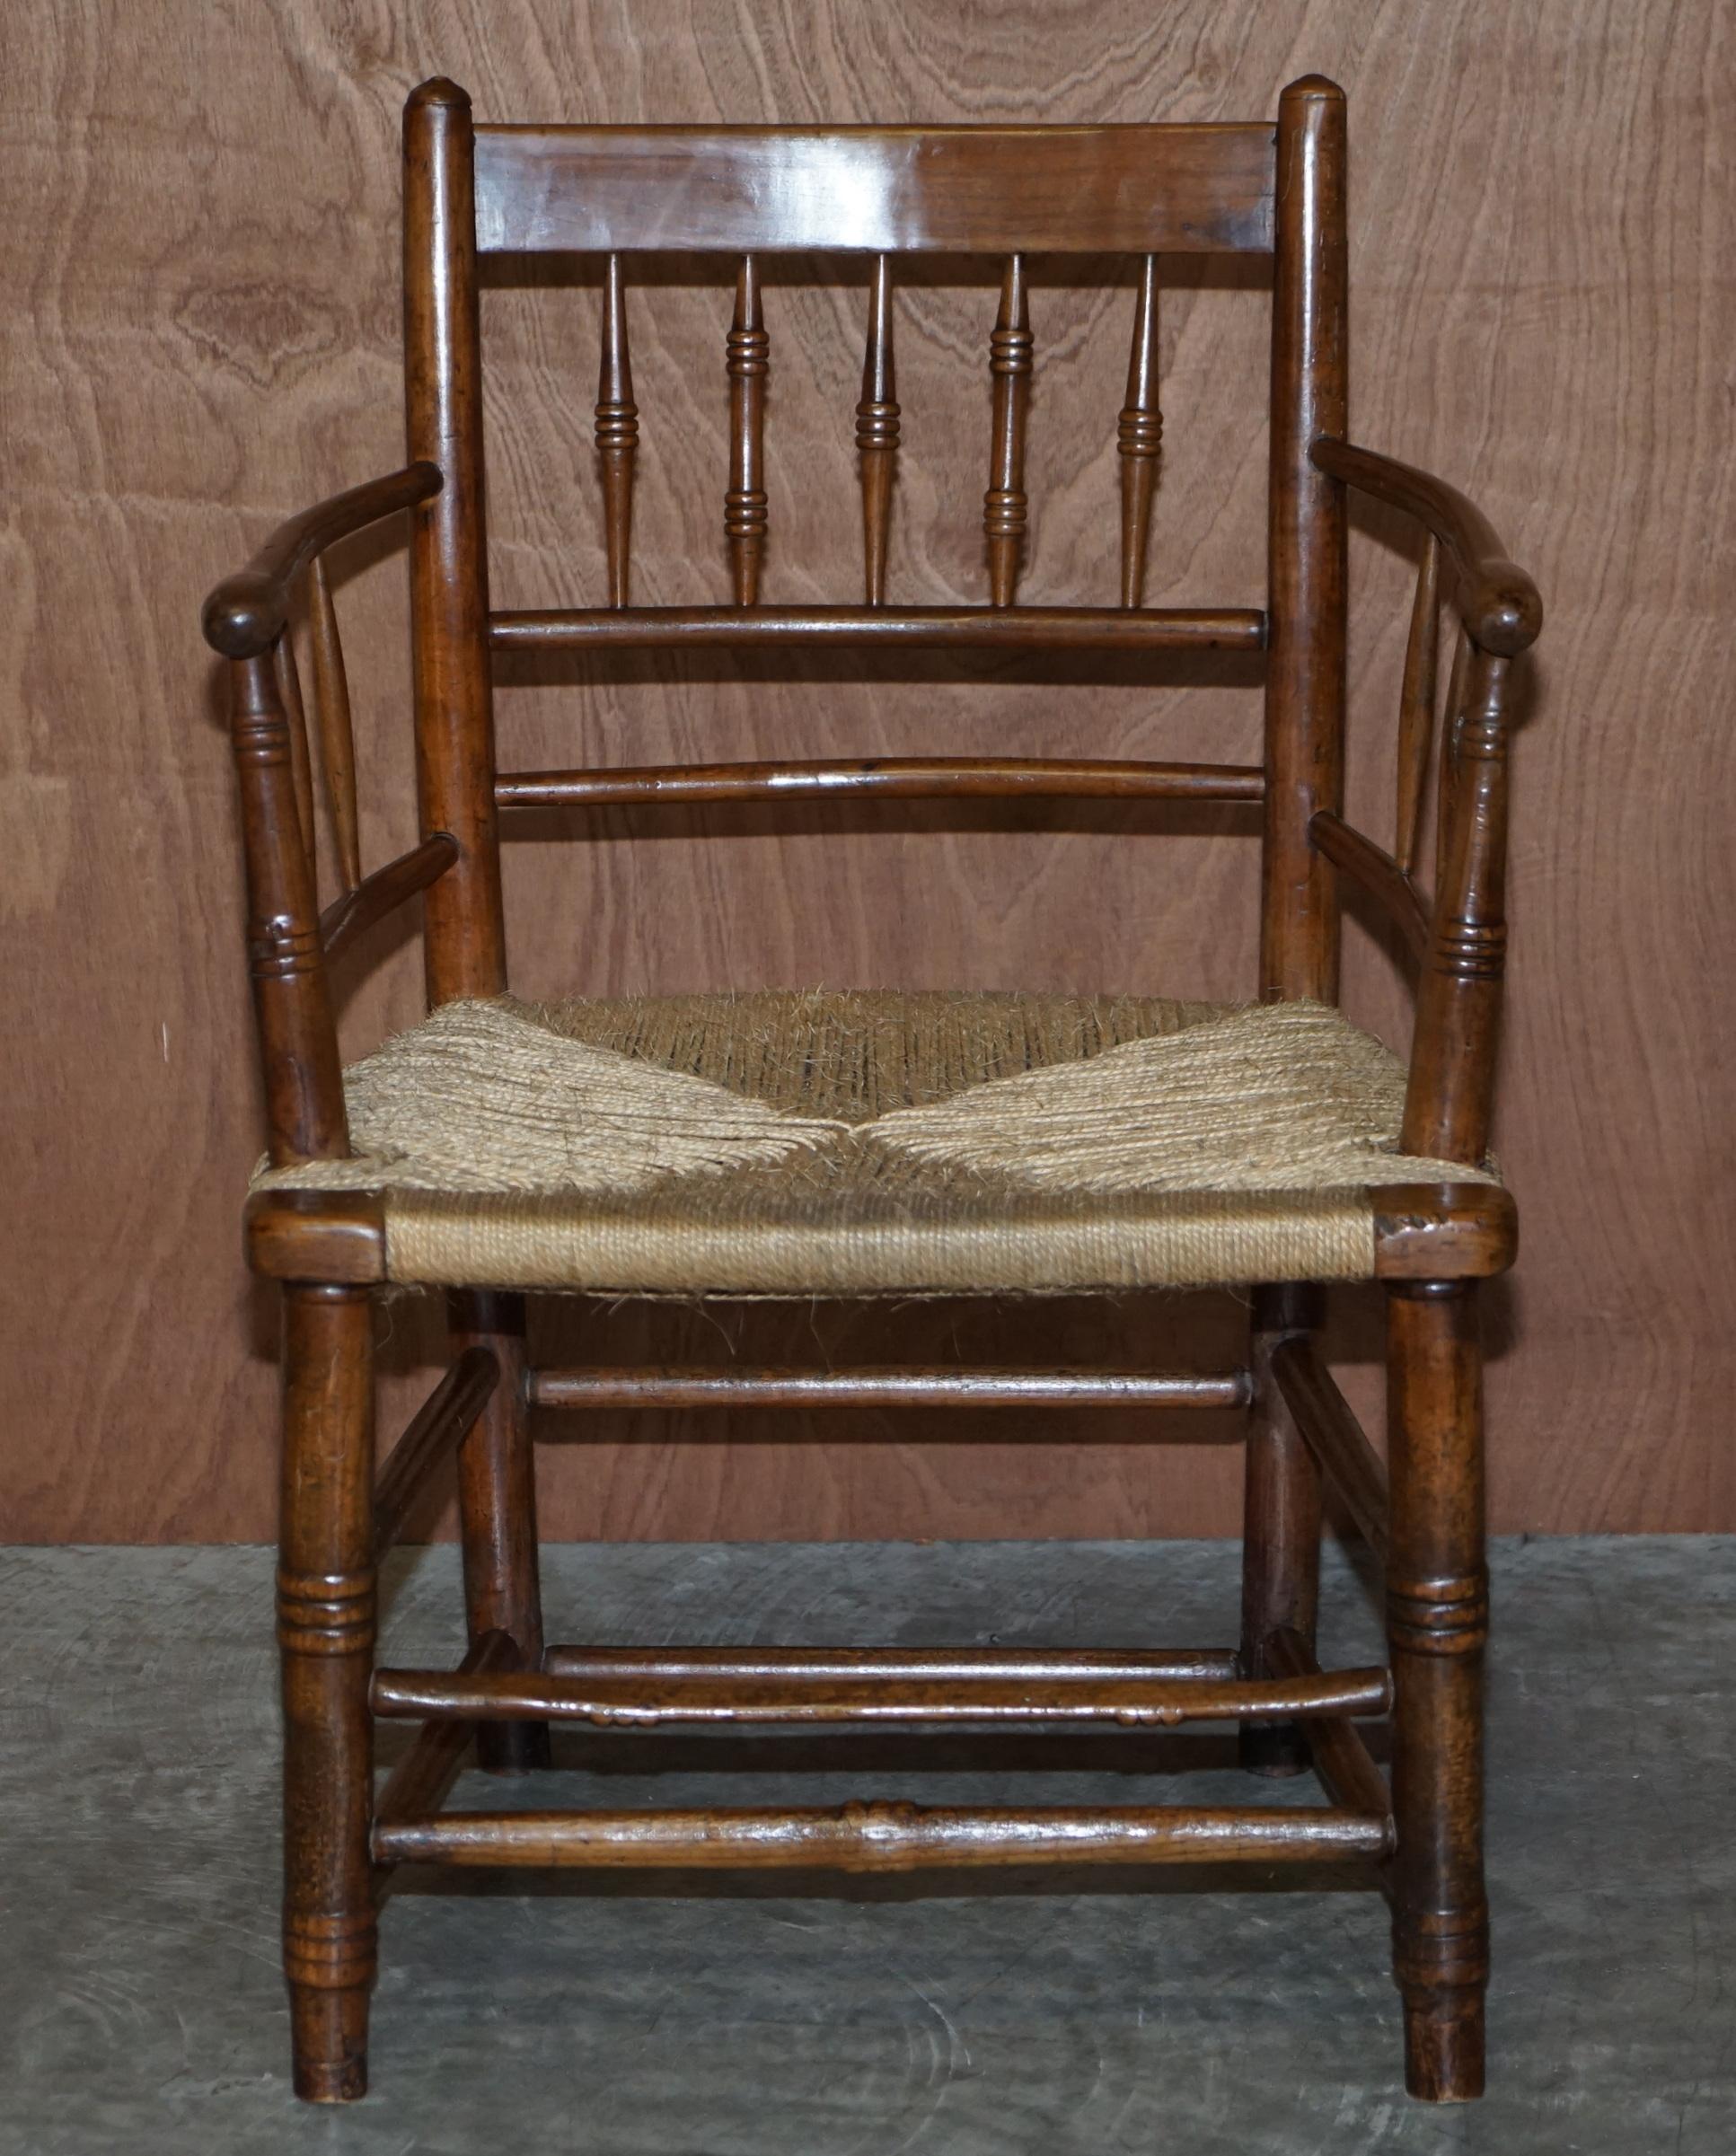 We are delighted to offer for sale this lovely very rare and collectable William Morris Rush seat Sussex armchair circa 1870-1880 as seen in the Victorian and Albert museum

The History This chair was named after a country chair found in Sussex,